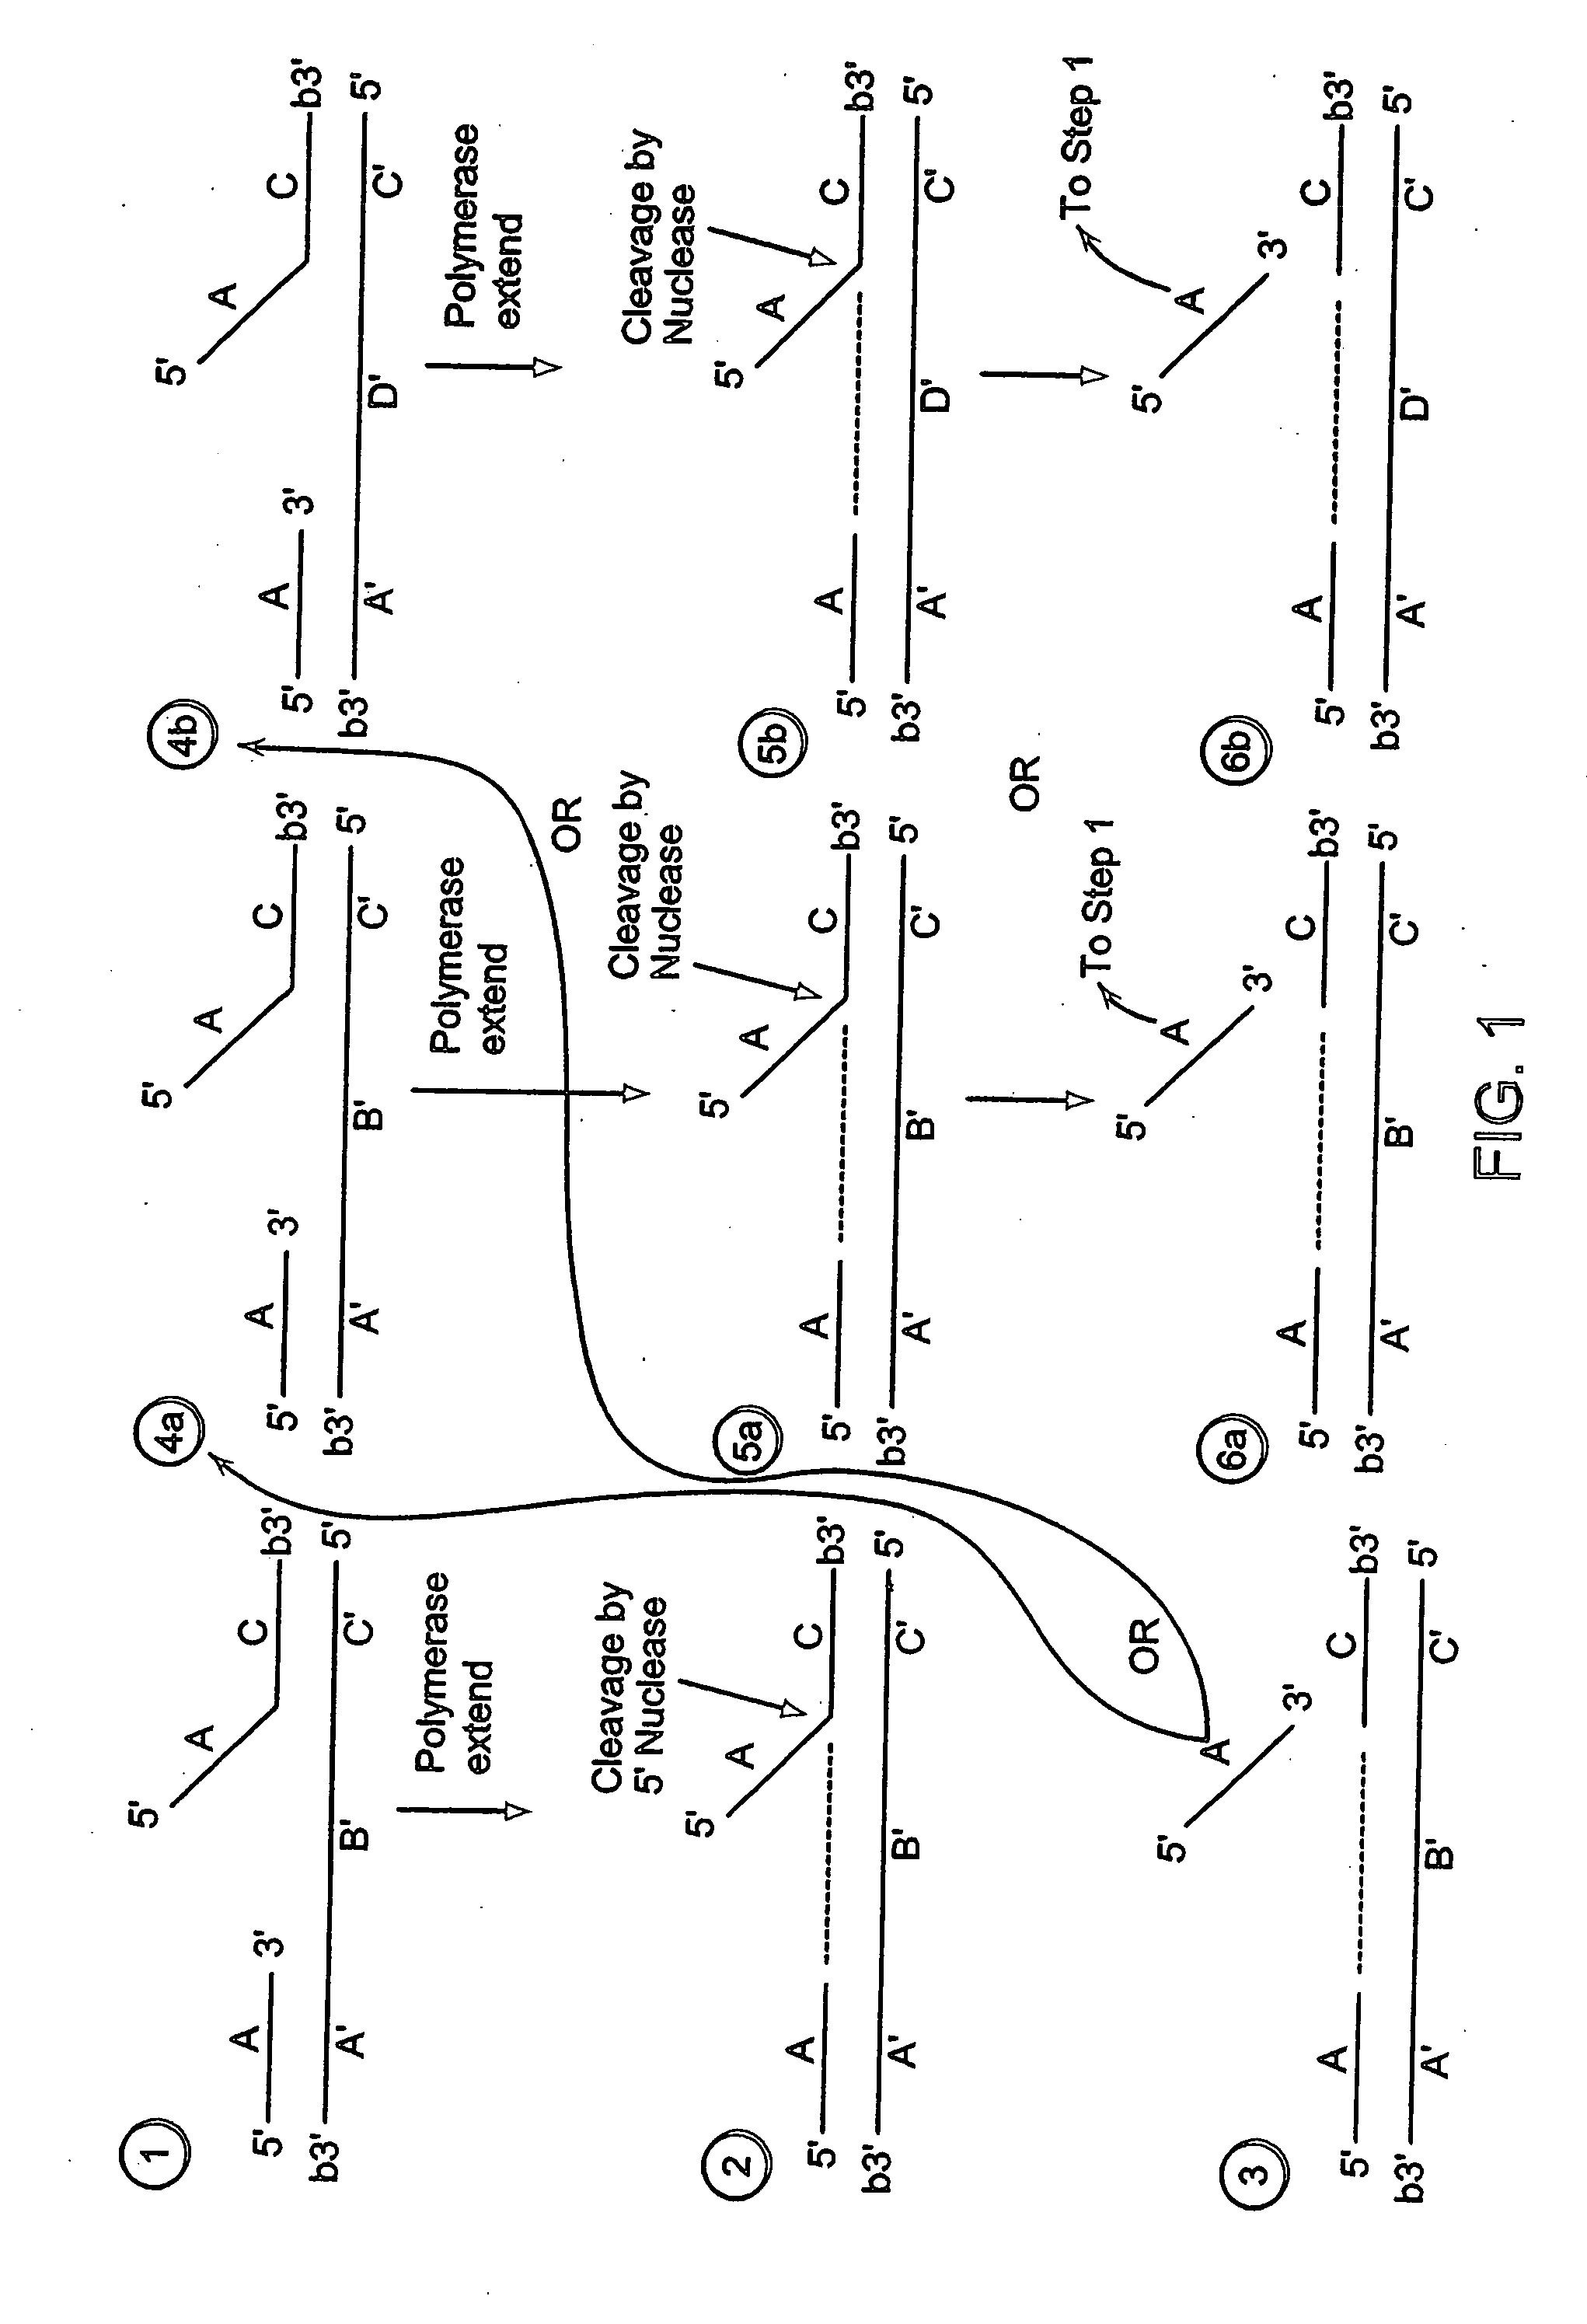 Methods for detection of a nucleic acid by sequential amplification